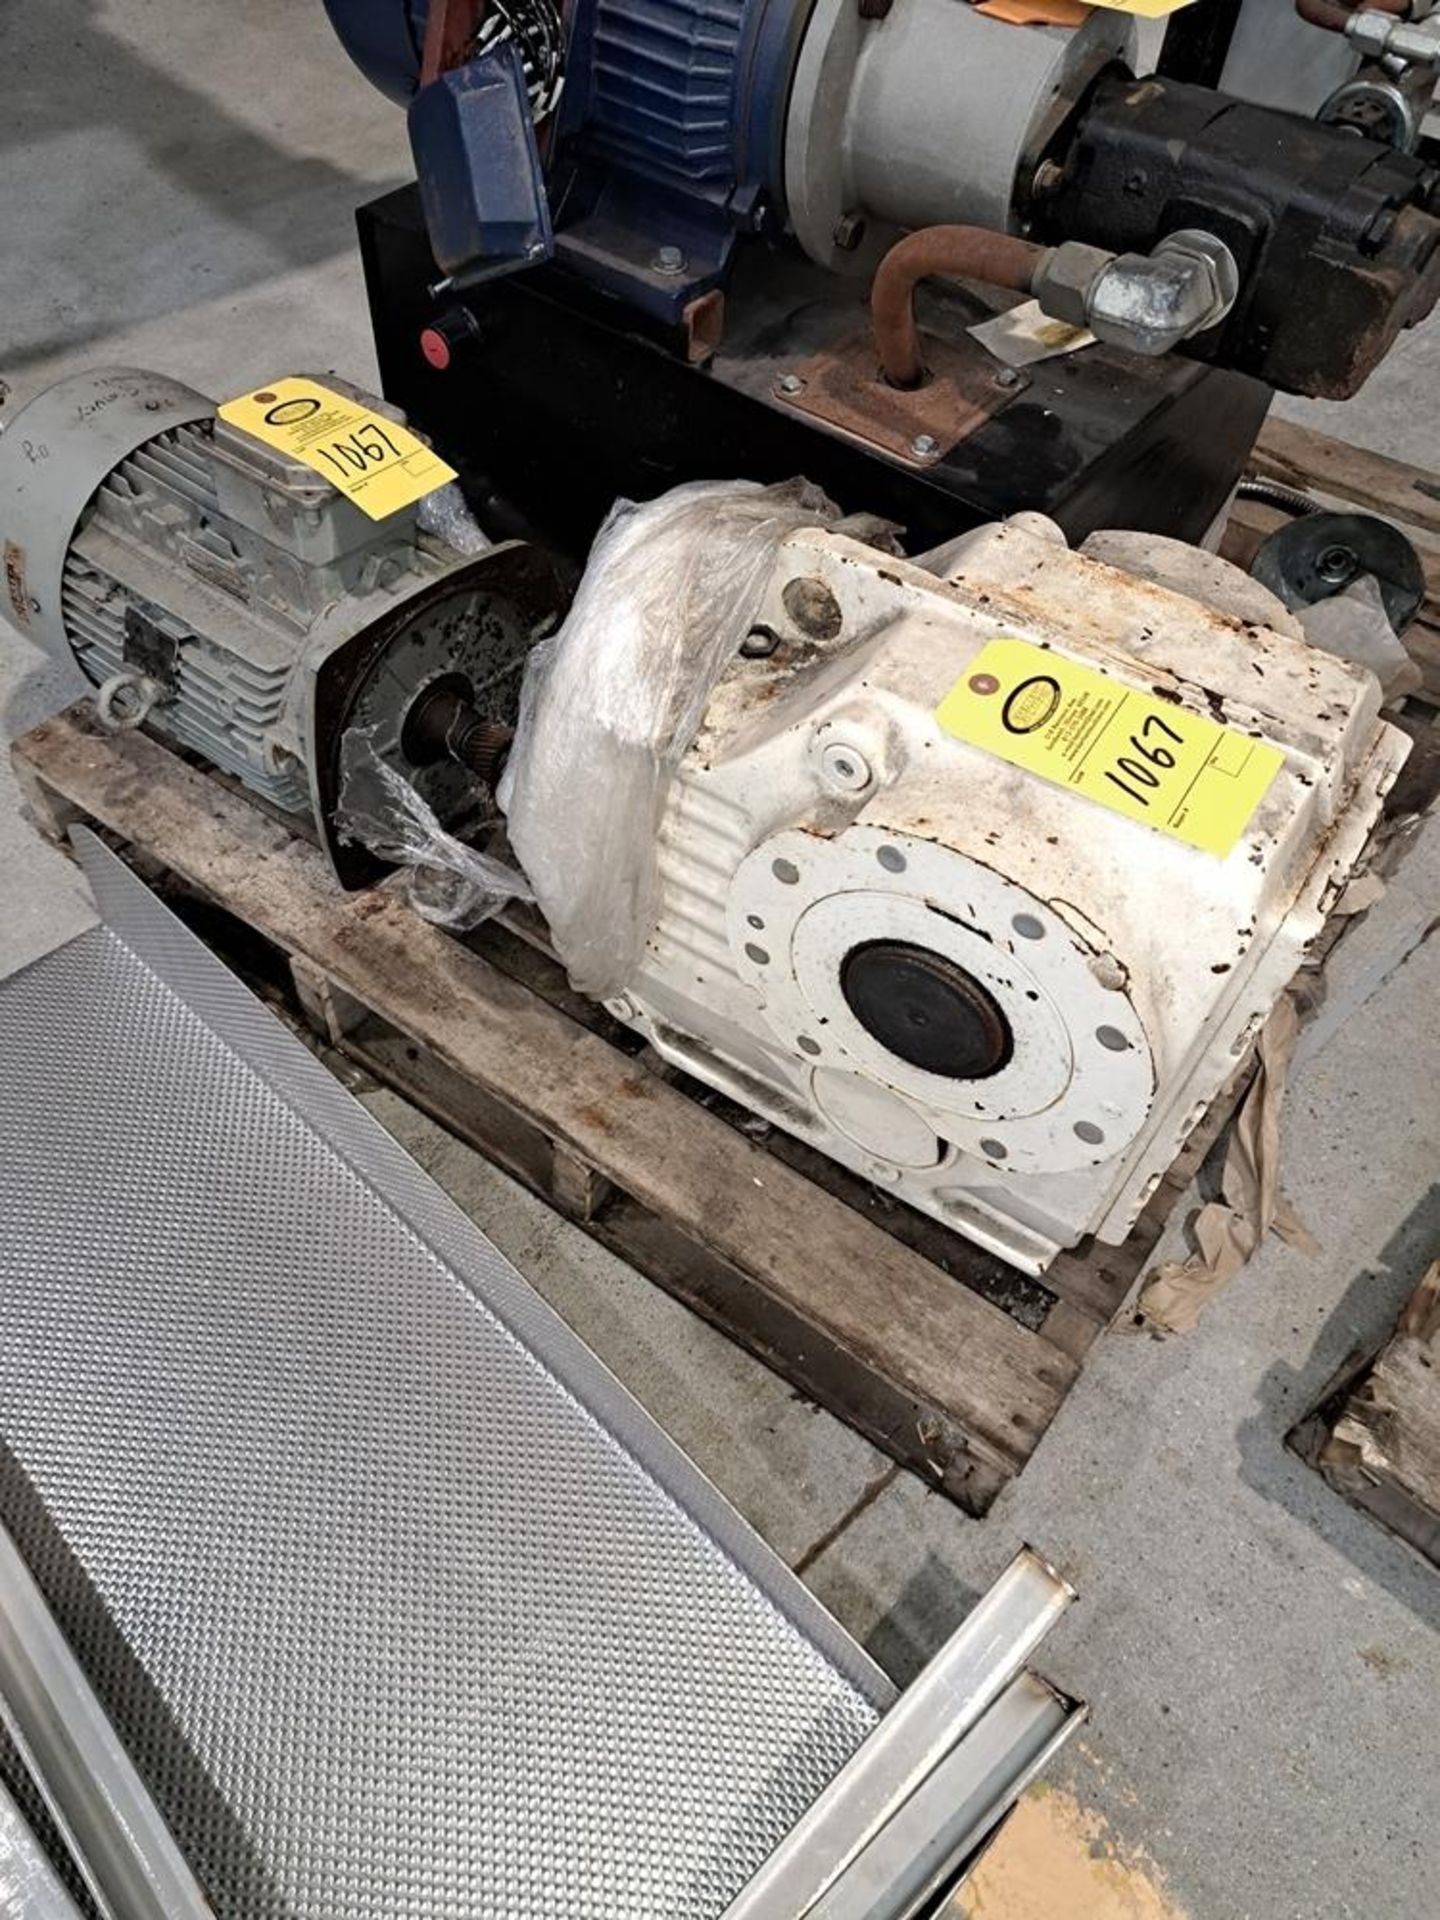 Lot (2) Motors, Gearbox: Required Loading Fee $150.00, Rigger-Norm Pavlish, Nebraska Stainless ( - Image 2 of 4